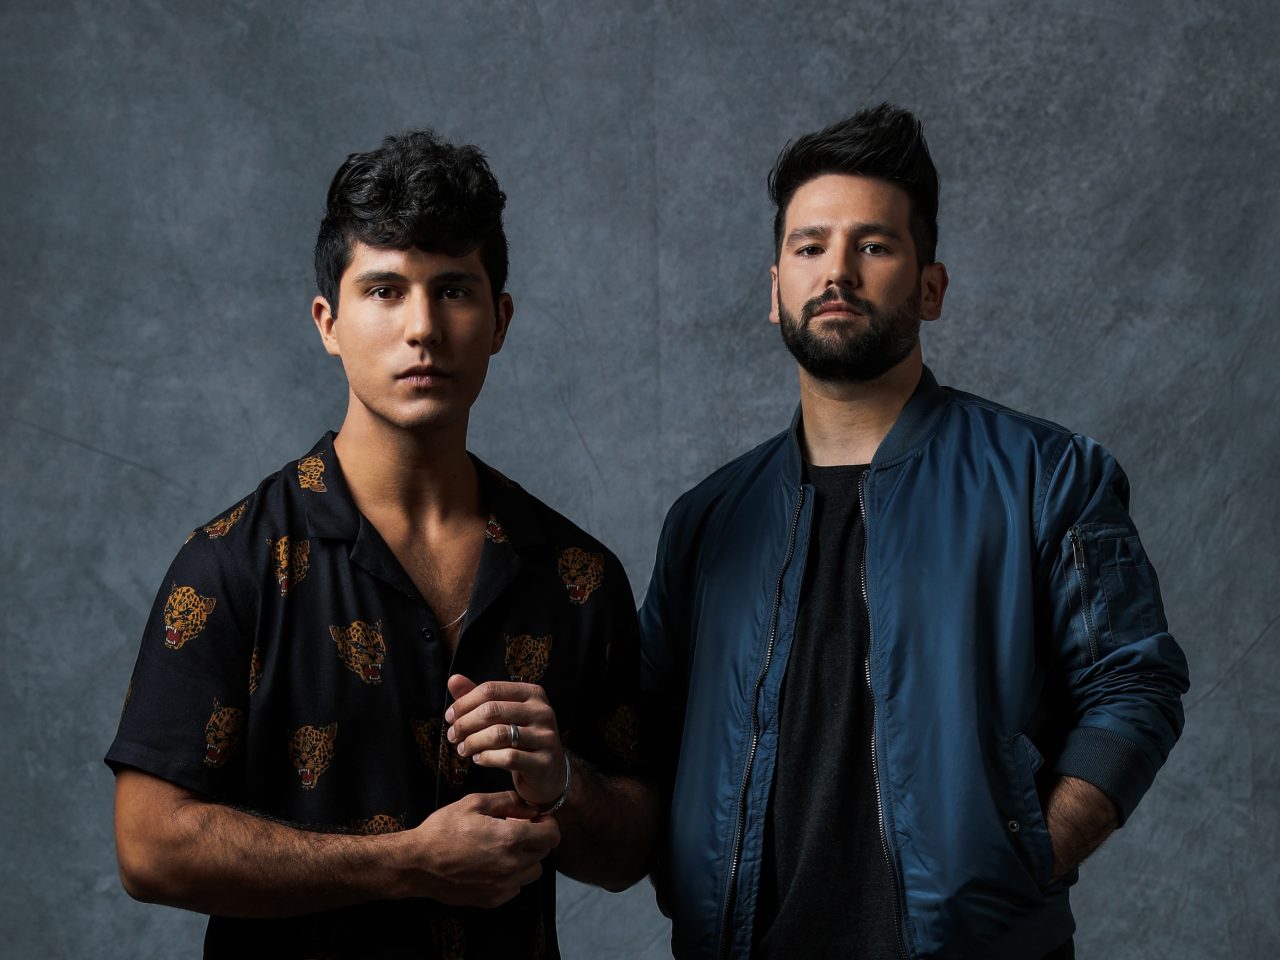 Dan + Shay, Kacey Musgraves to Perform on 2019 GRAMMY Awards